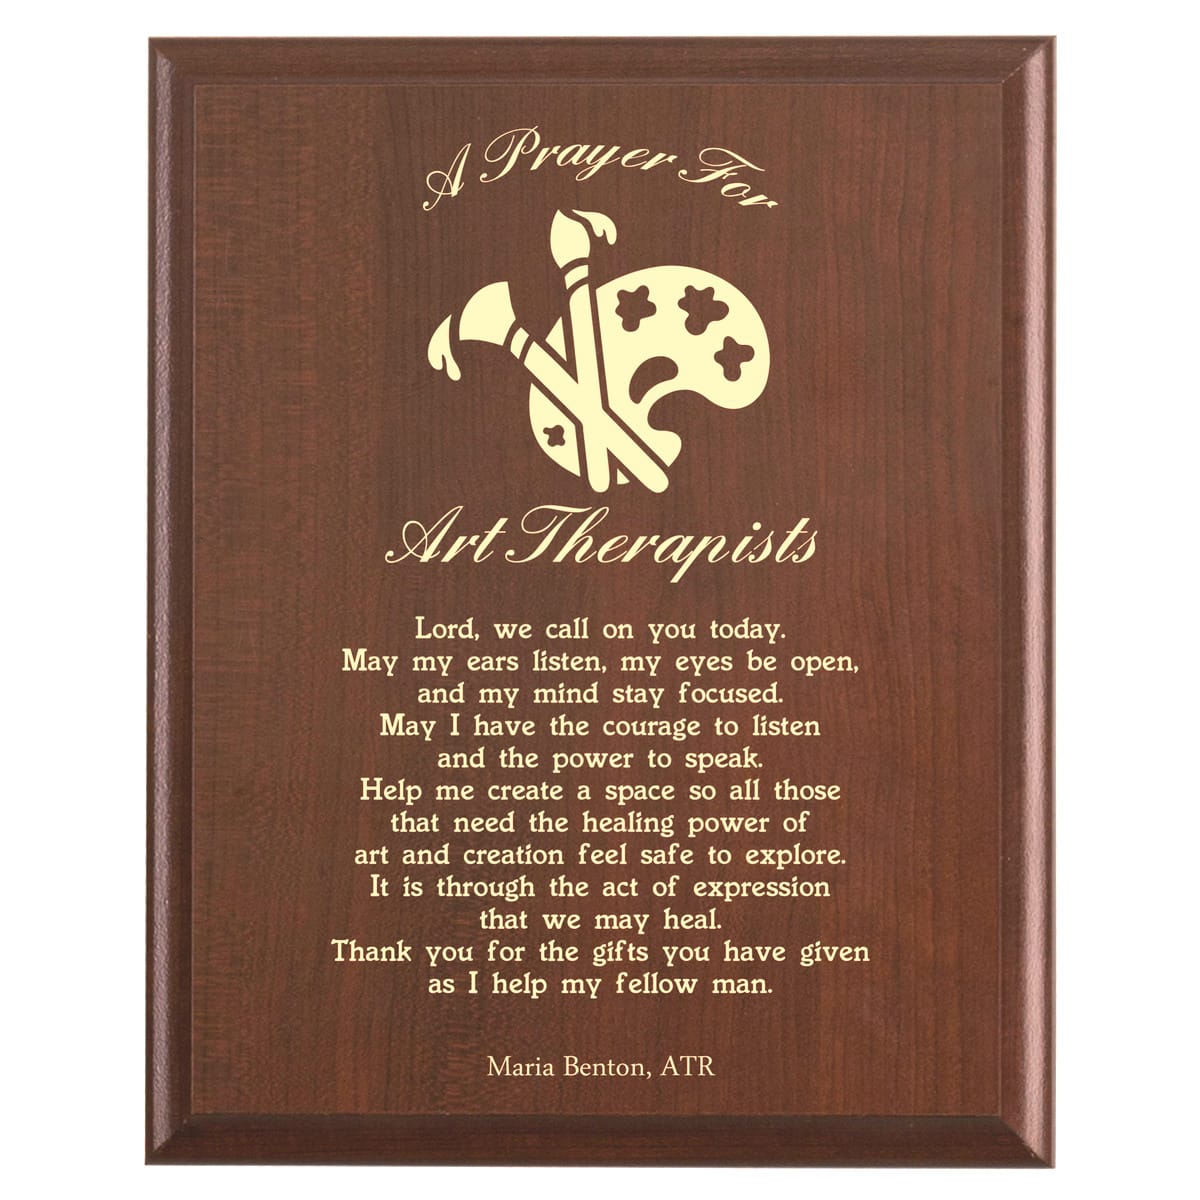 Plaque photo: Art Therapist Prayer Plaque design with free personalization. Wood style finish with customized text.